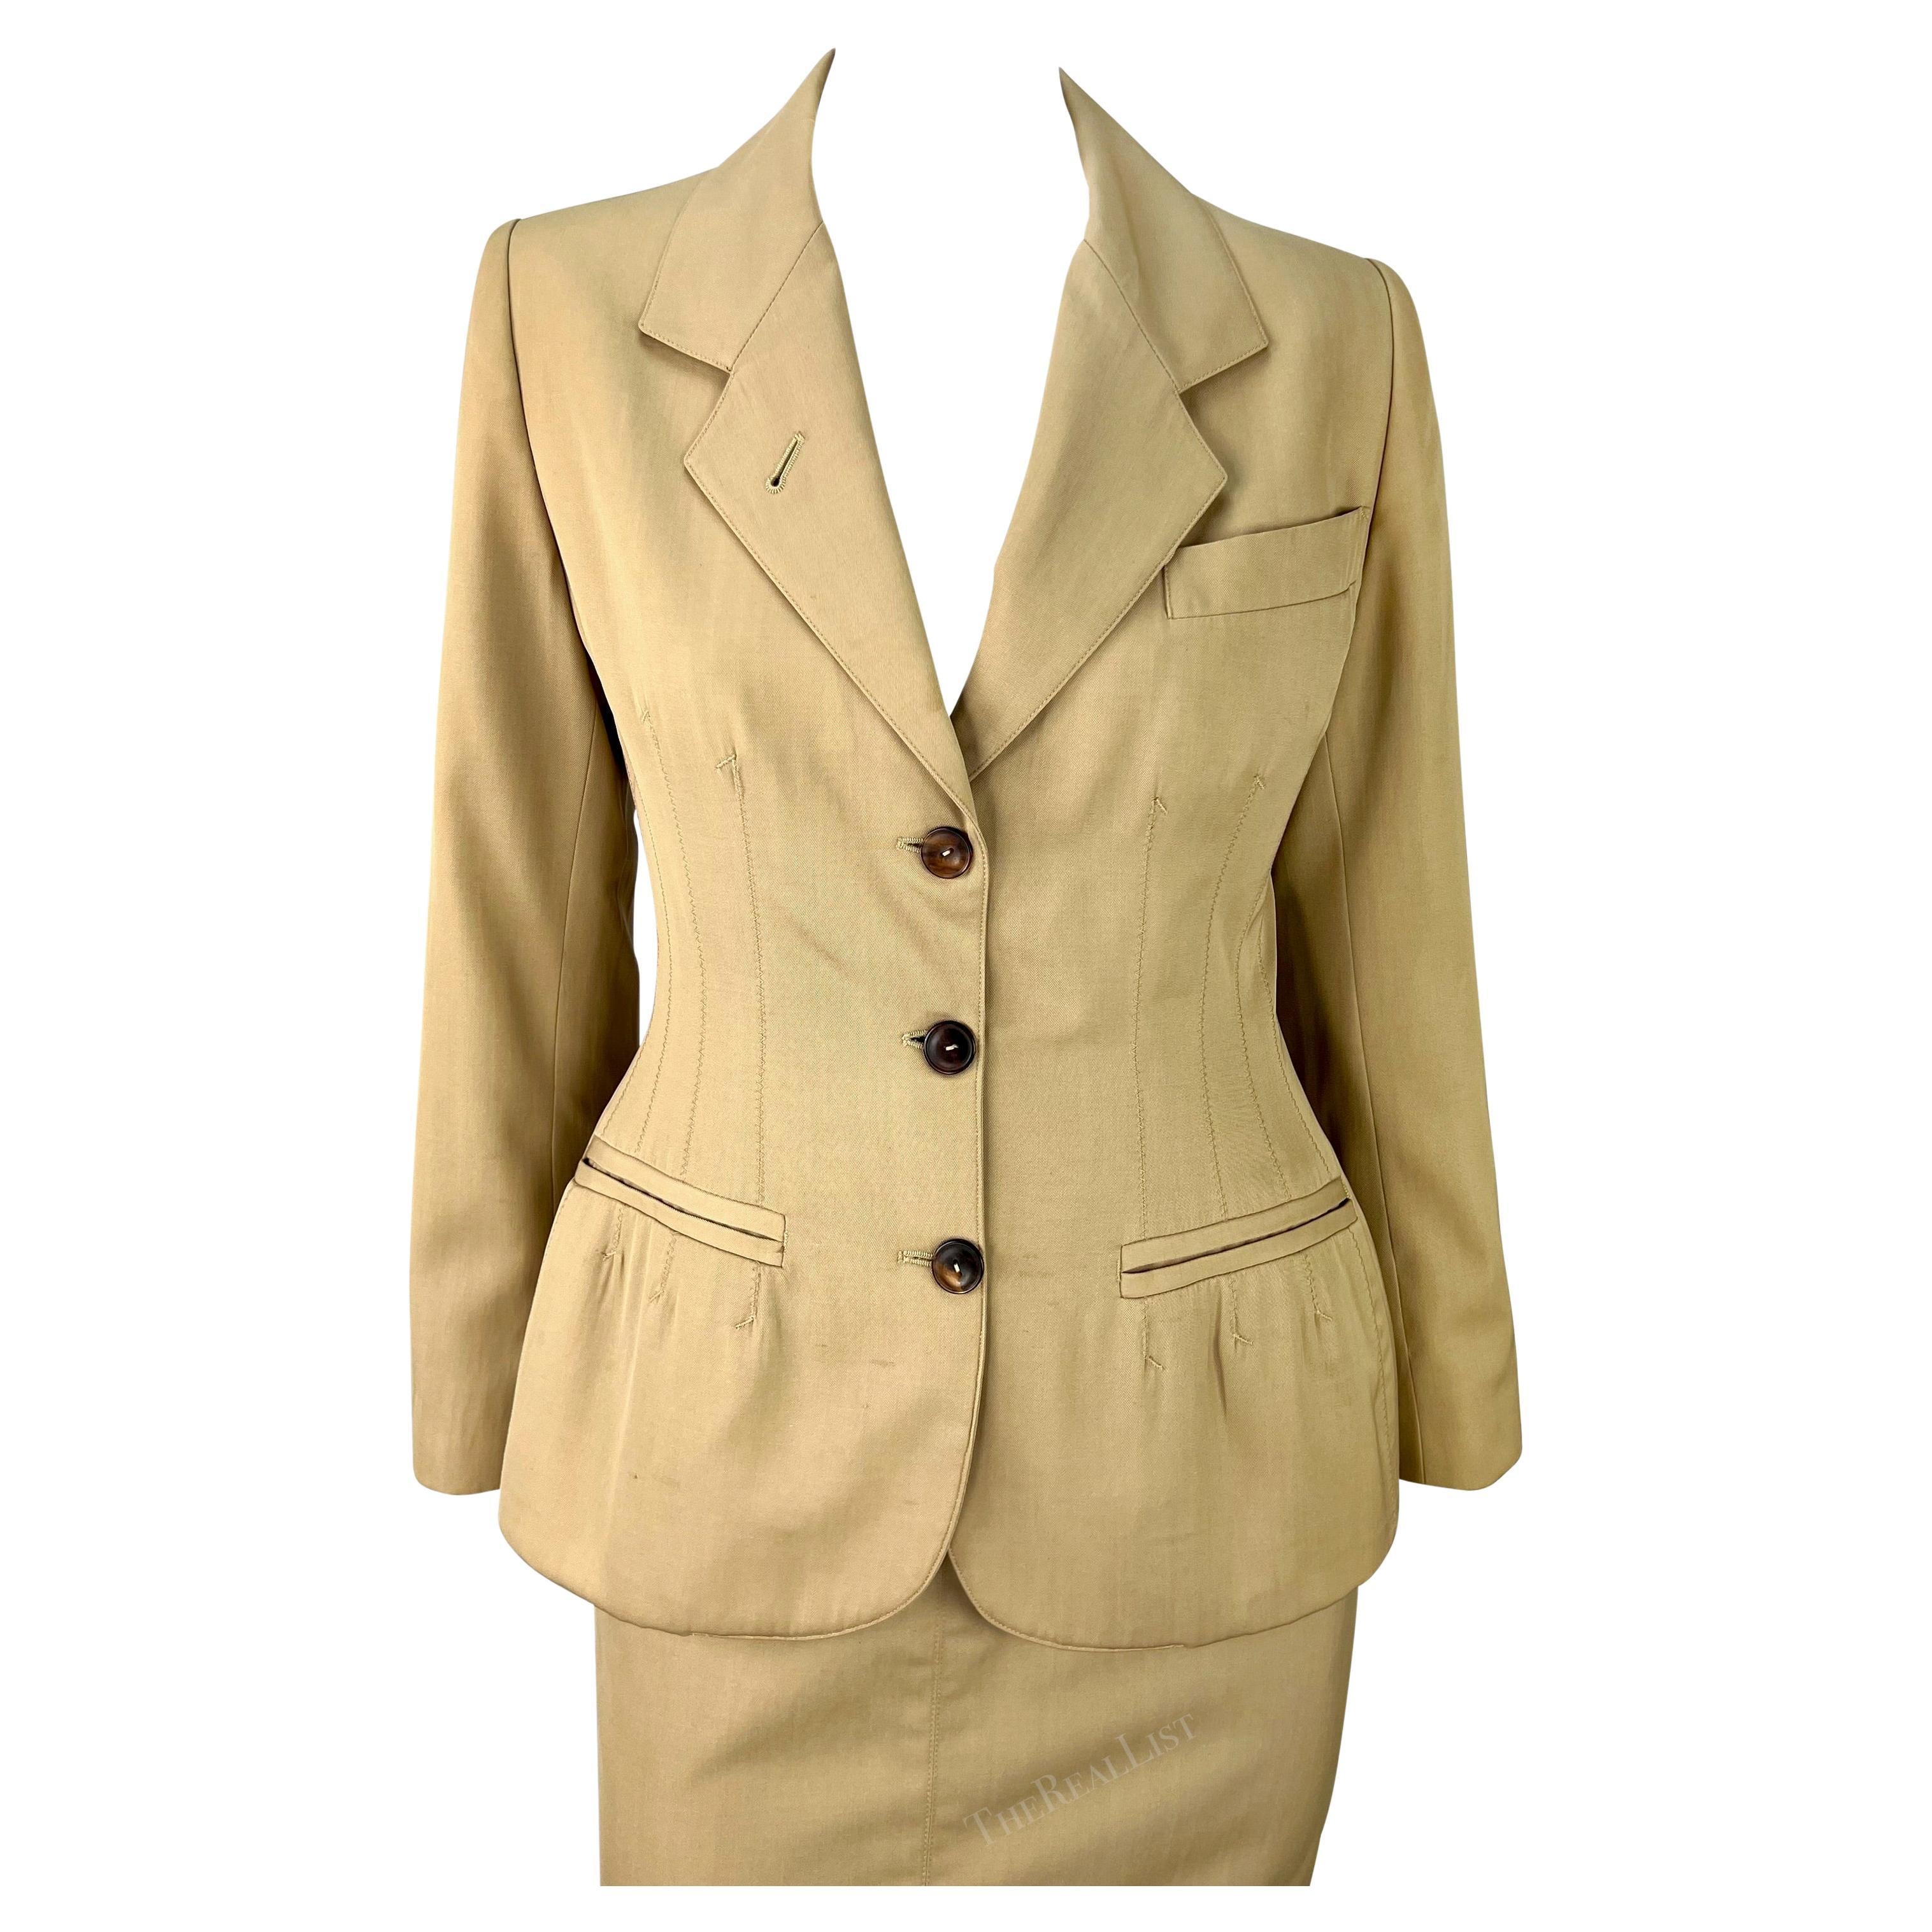 Presenting a sleek beige Jean Paul Gaultier skirt suit. From the early 1990s, this suit consists of a fitted blazer and matching pencil skirt. The blazer features a peak lapel, darts at the waist, and light padding at the hem.

Approximate